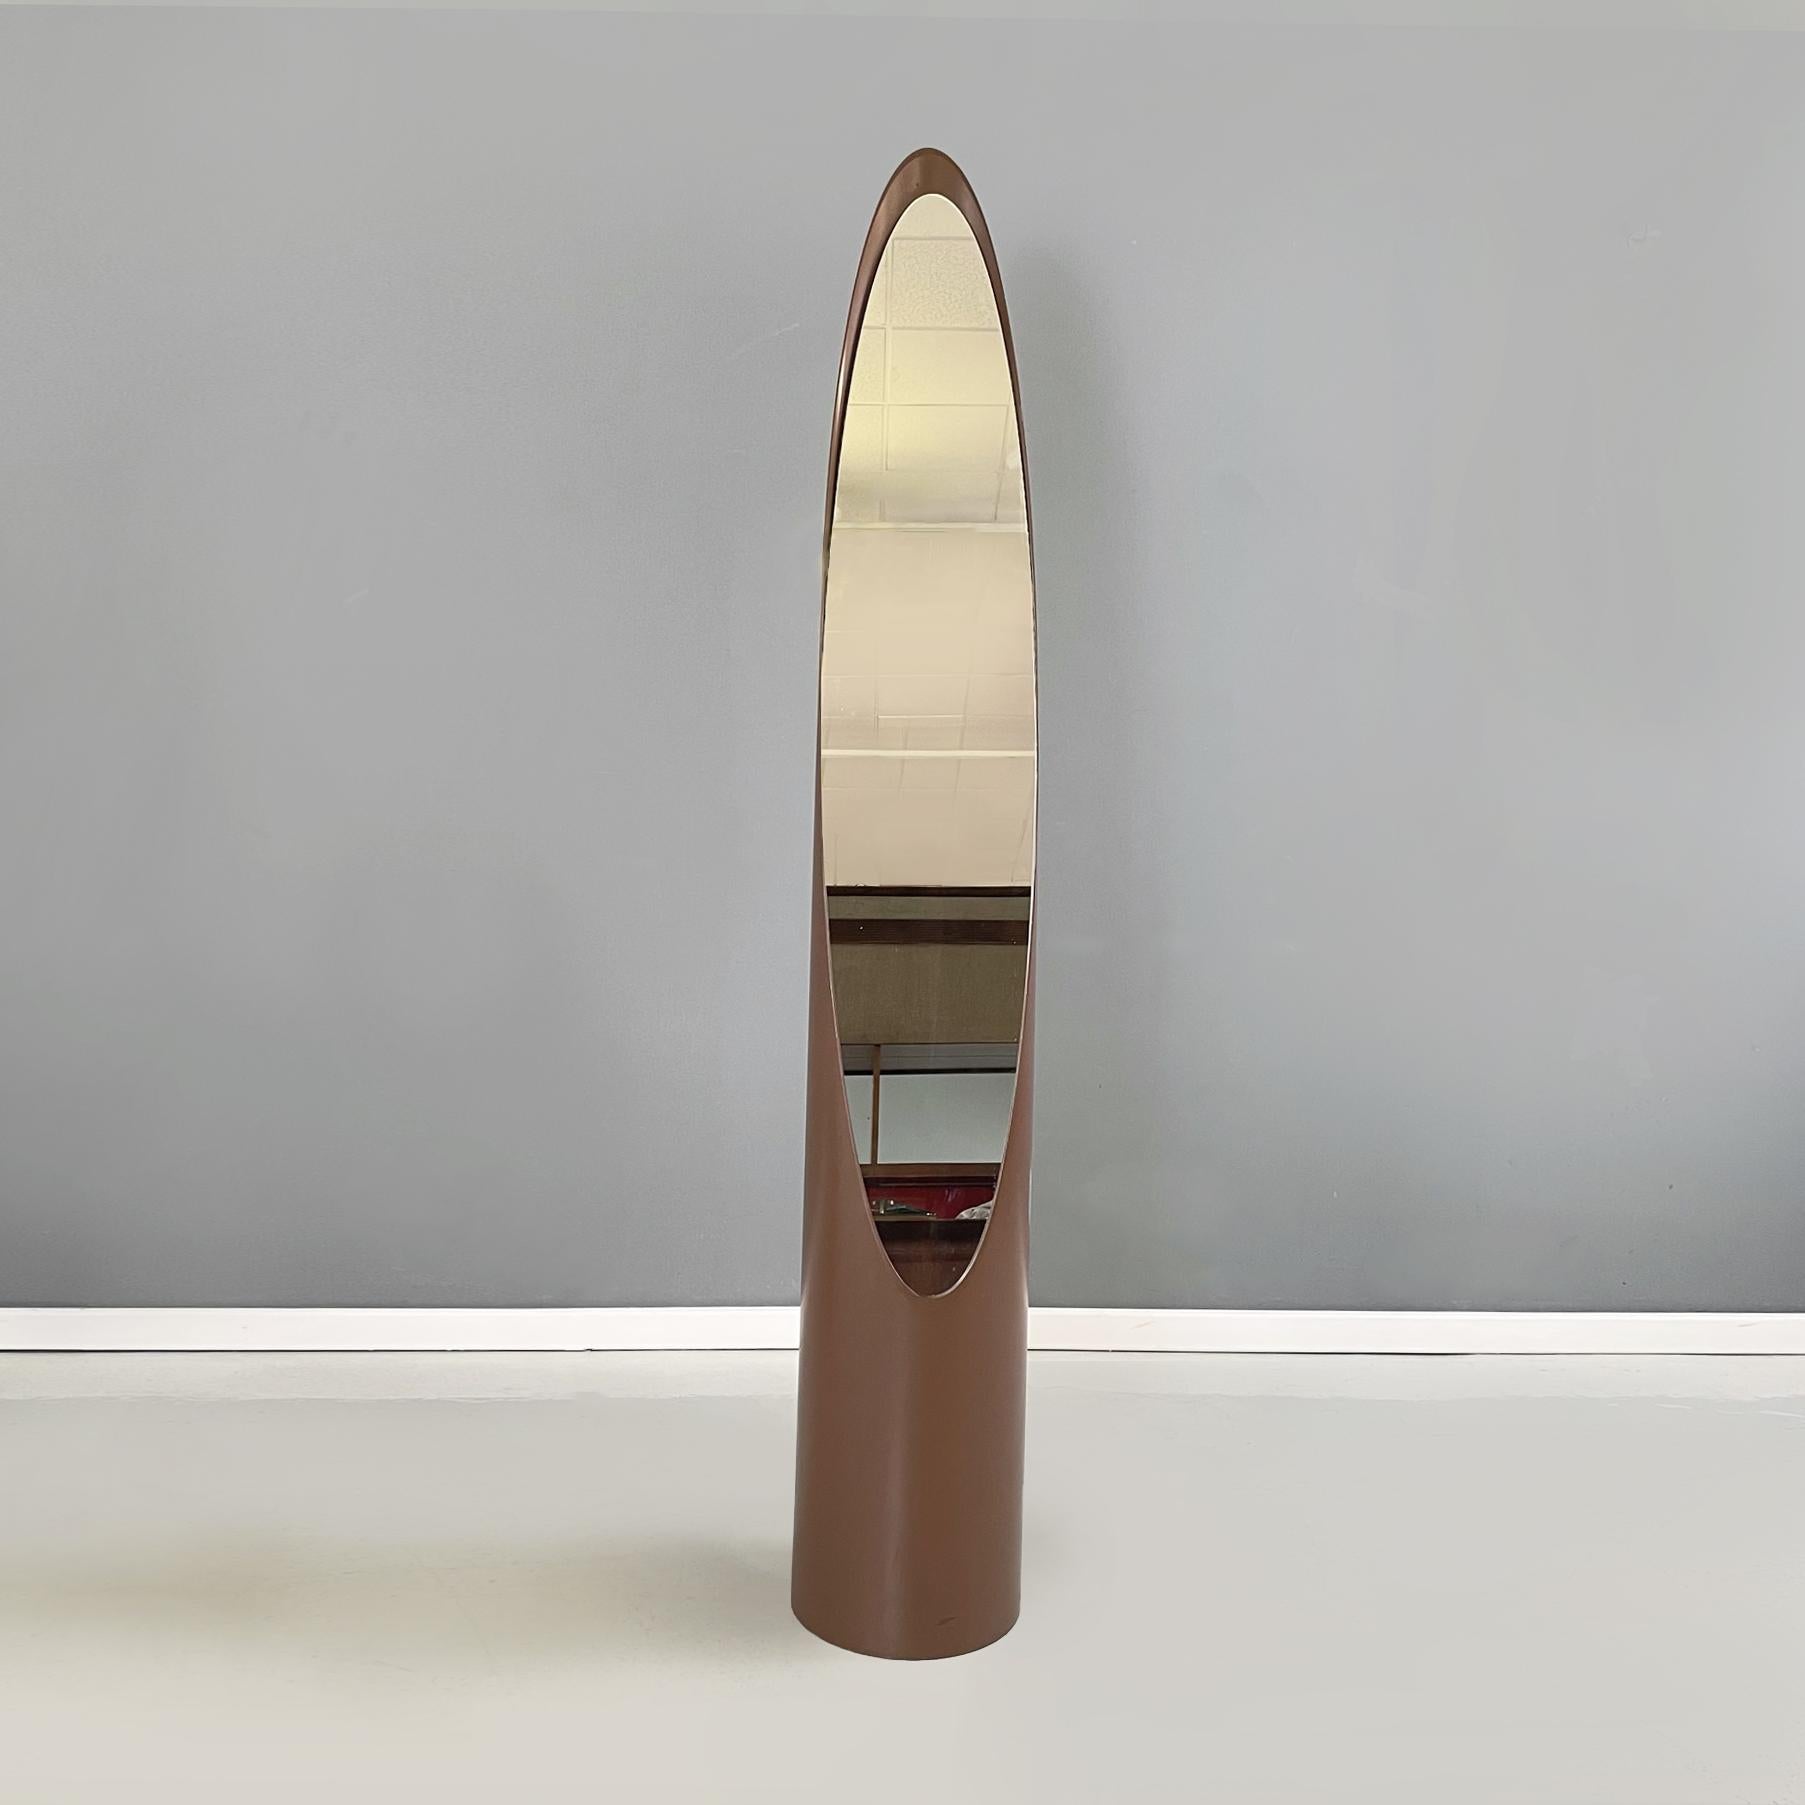 Italian space age Brown Floor mirror Unghia or Lipstick by Rodolfo Bonetto 1970s
Self-supporting floor mirror mod. Unghia, also known as Lipstick, with a round base with ABS plastic structure in dark brown. The elliptical mirror is slightly inclined